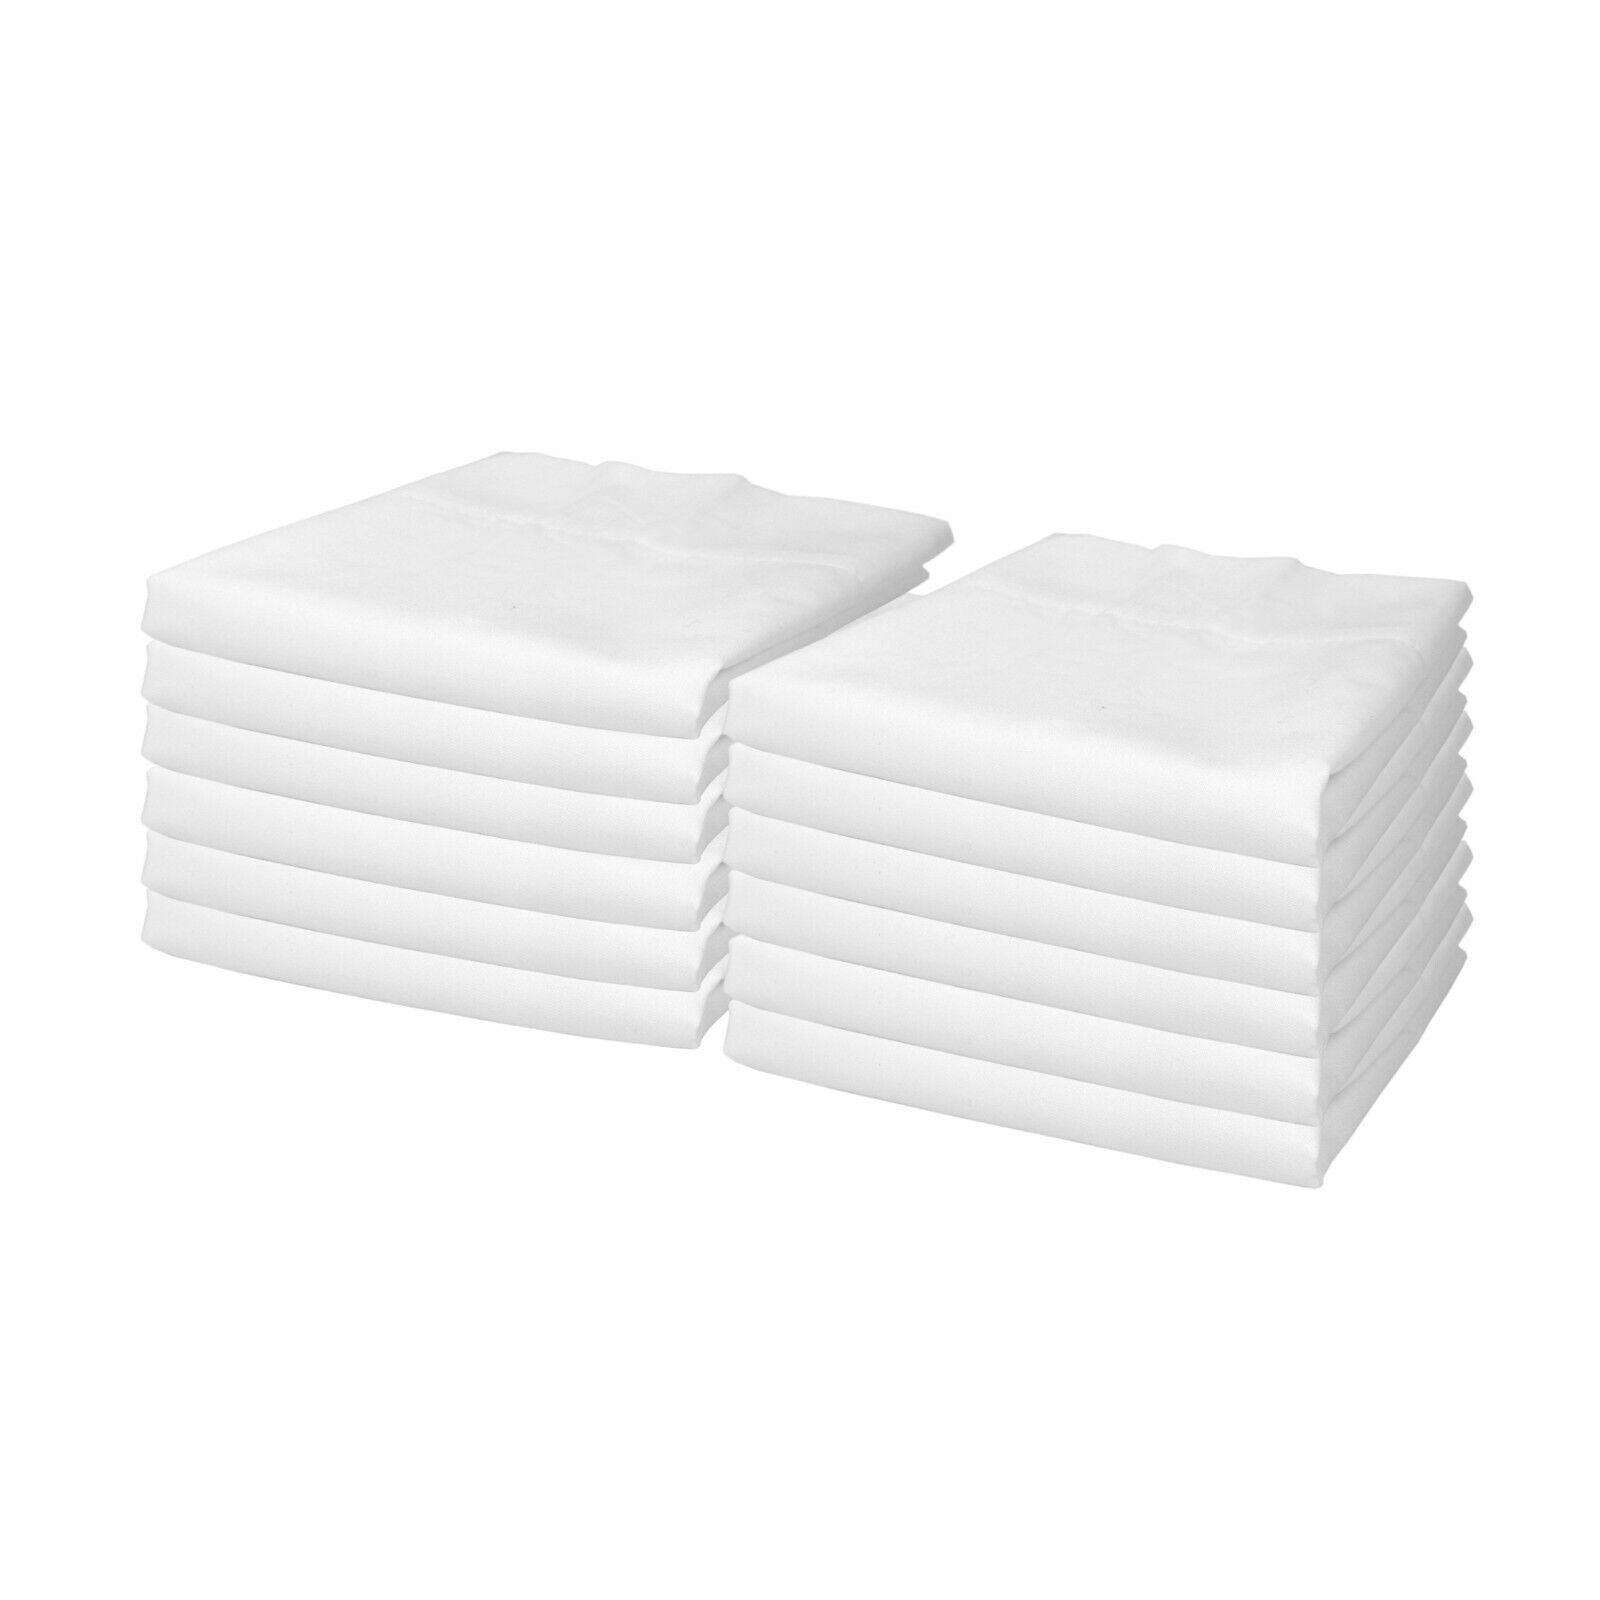 Bulk 12 Pack of Lulworth Pillowcases - Standard Size White 20 x 30 Soft Bedding Arkwright Does Not Apply